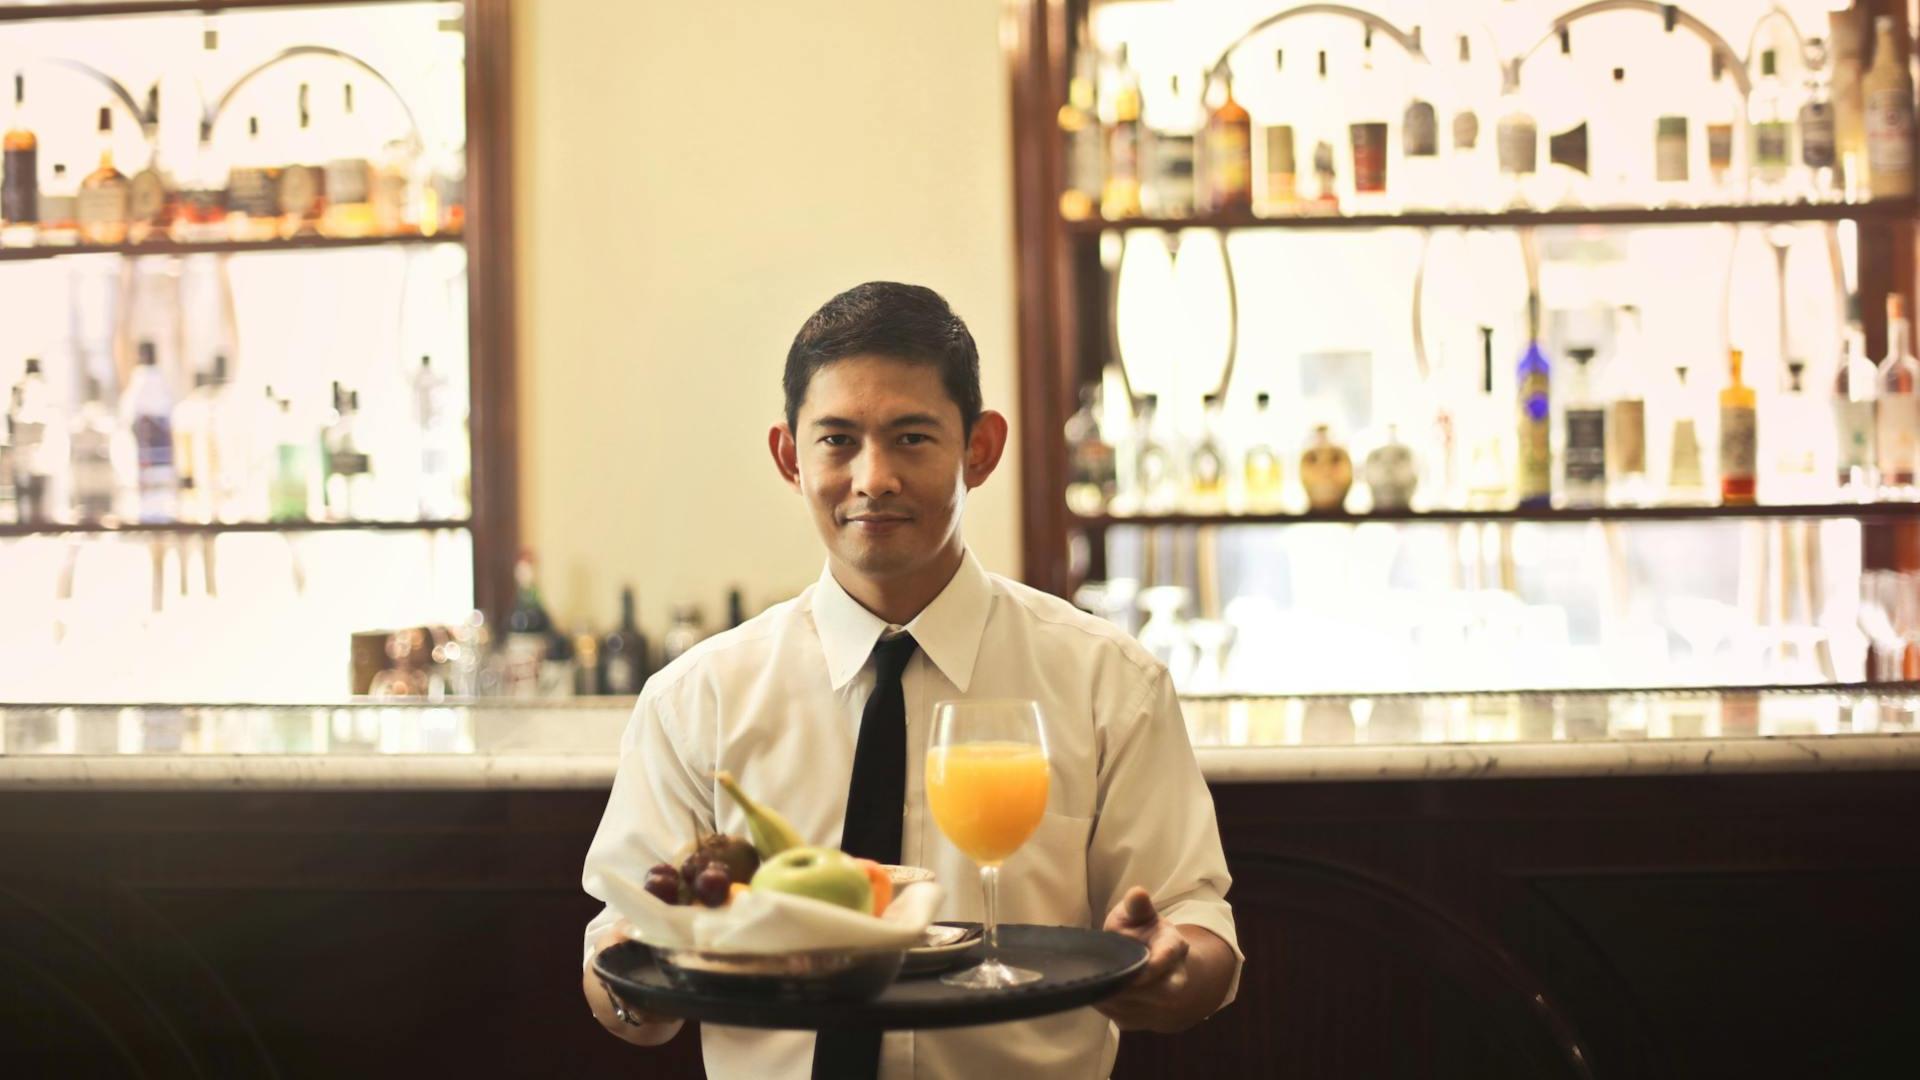 restaurant waiter smiling while holding a tray with food